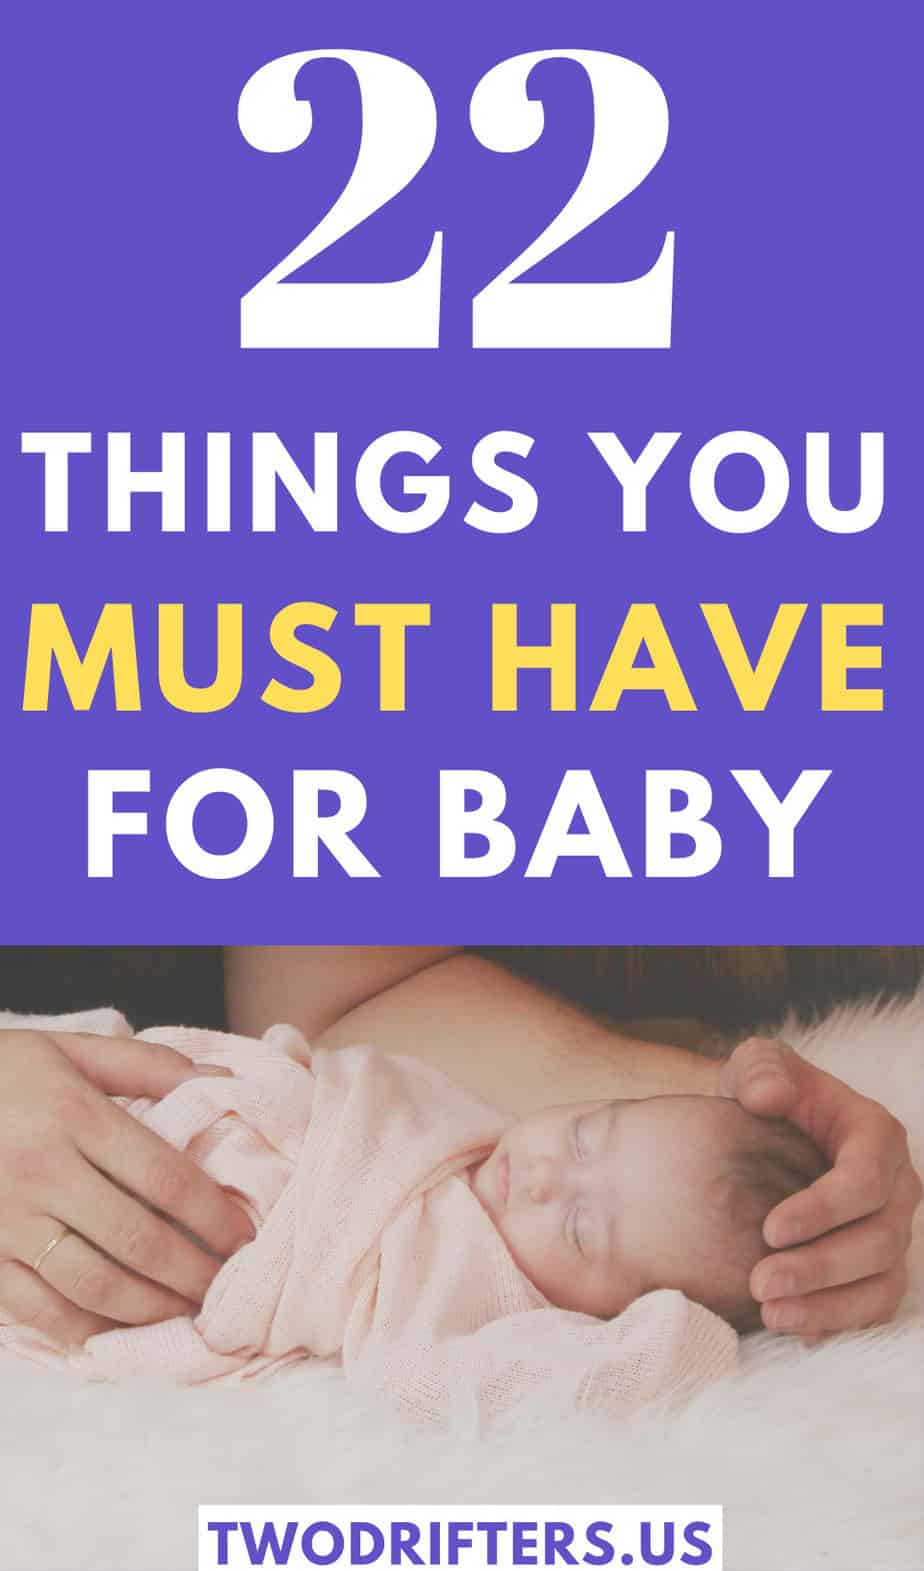 Pinterest social image that says “22 things you must have for baby.”